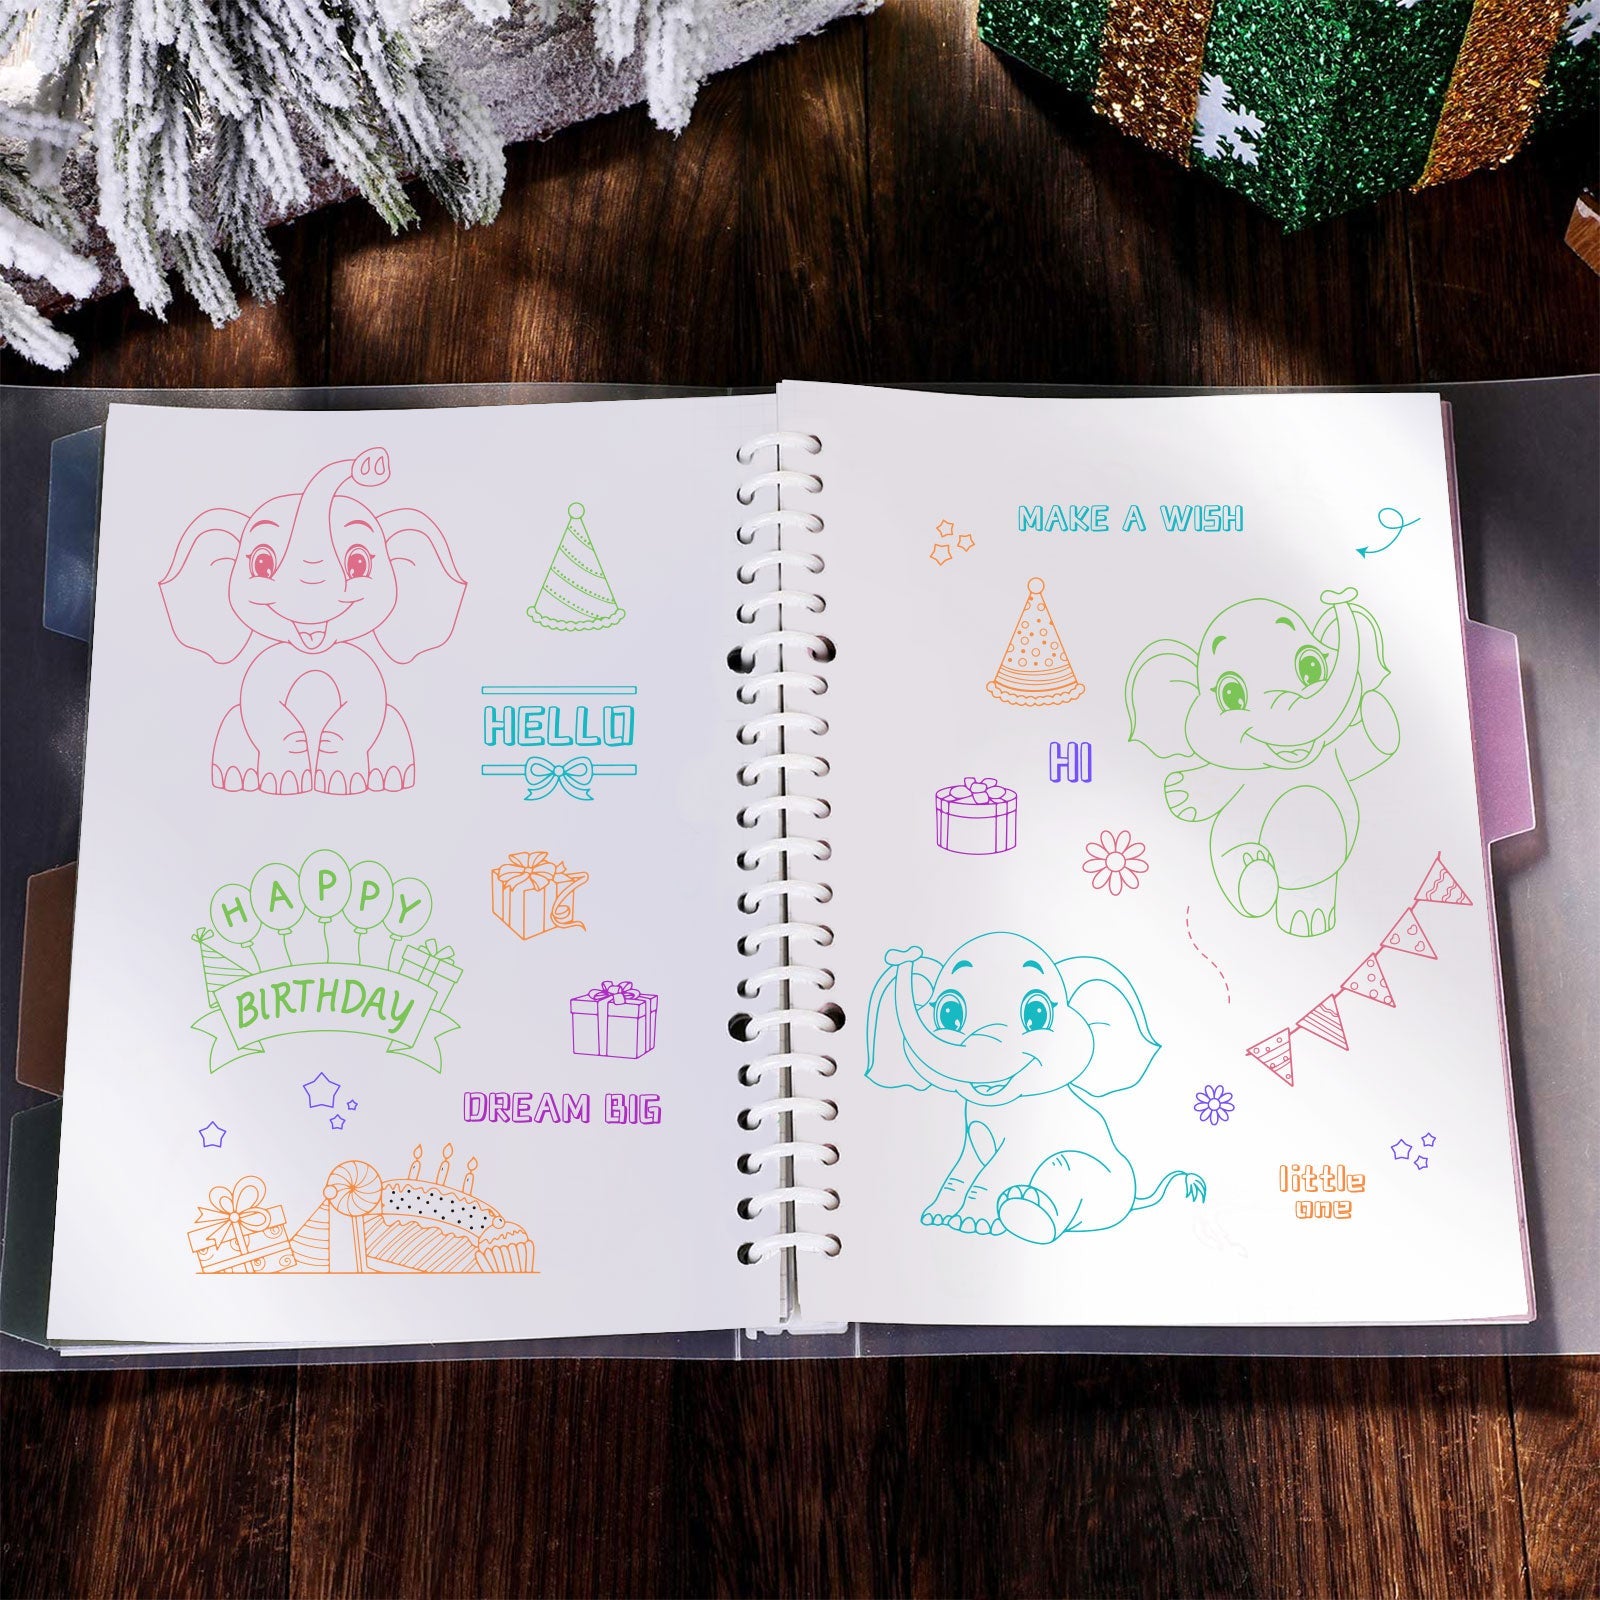 Happy Birthday Wishes Clear Stamp Transparent Seal Diy